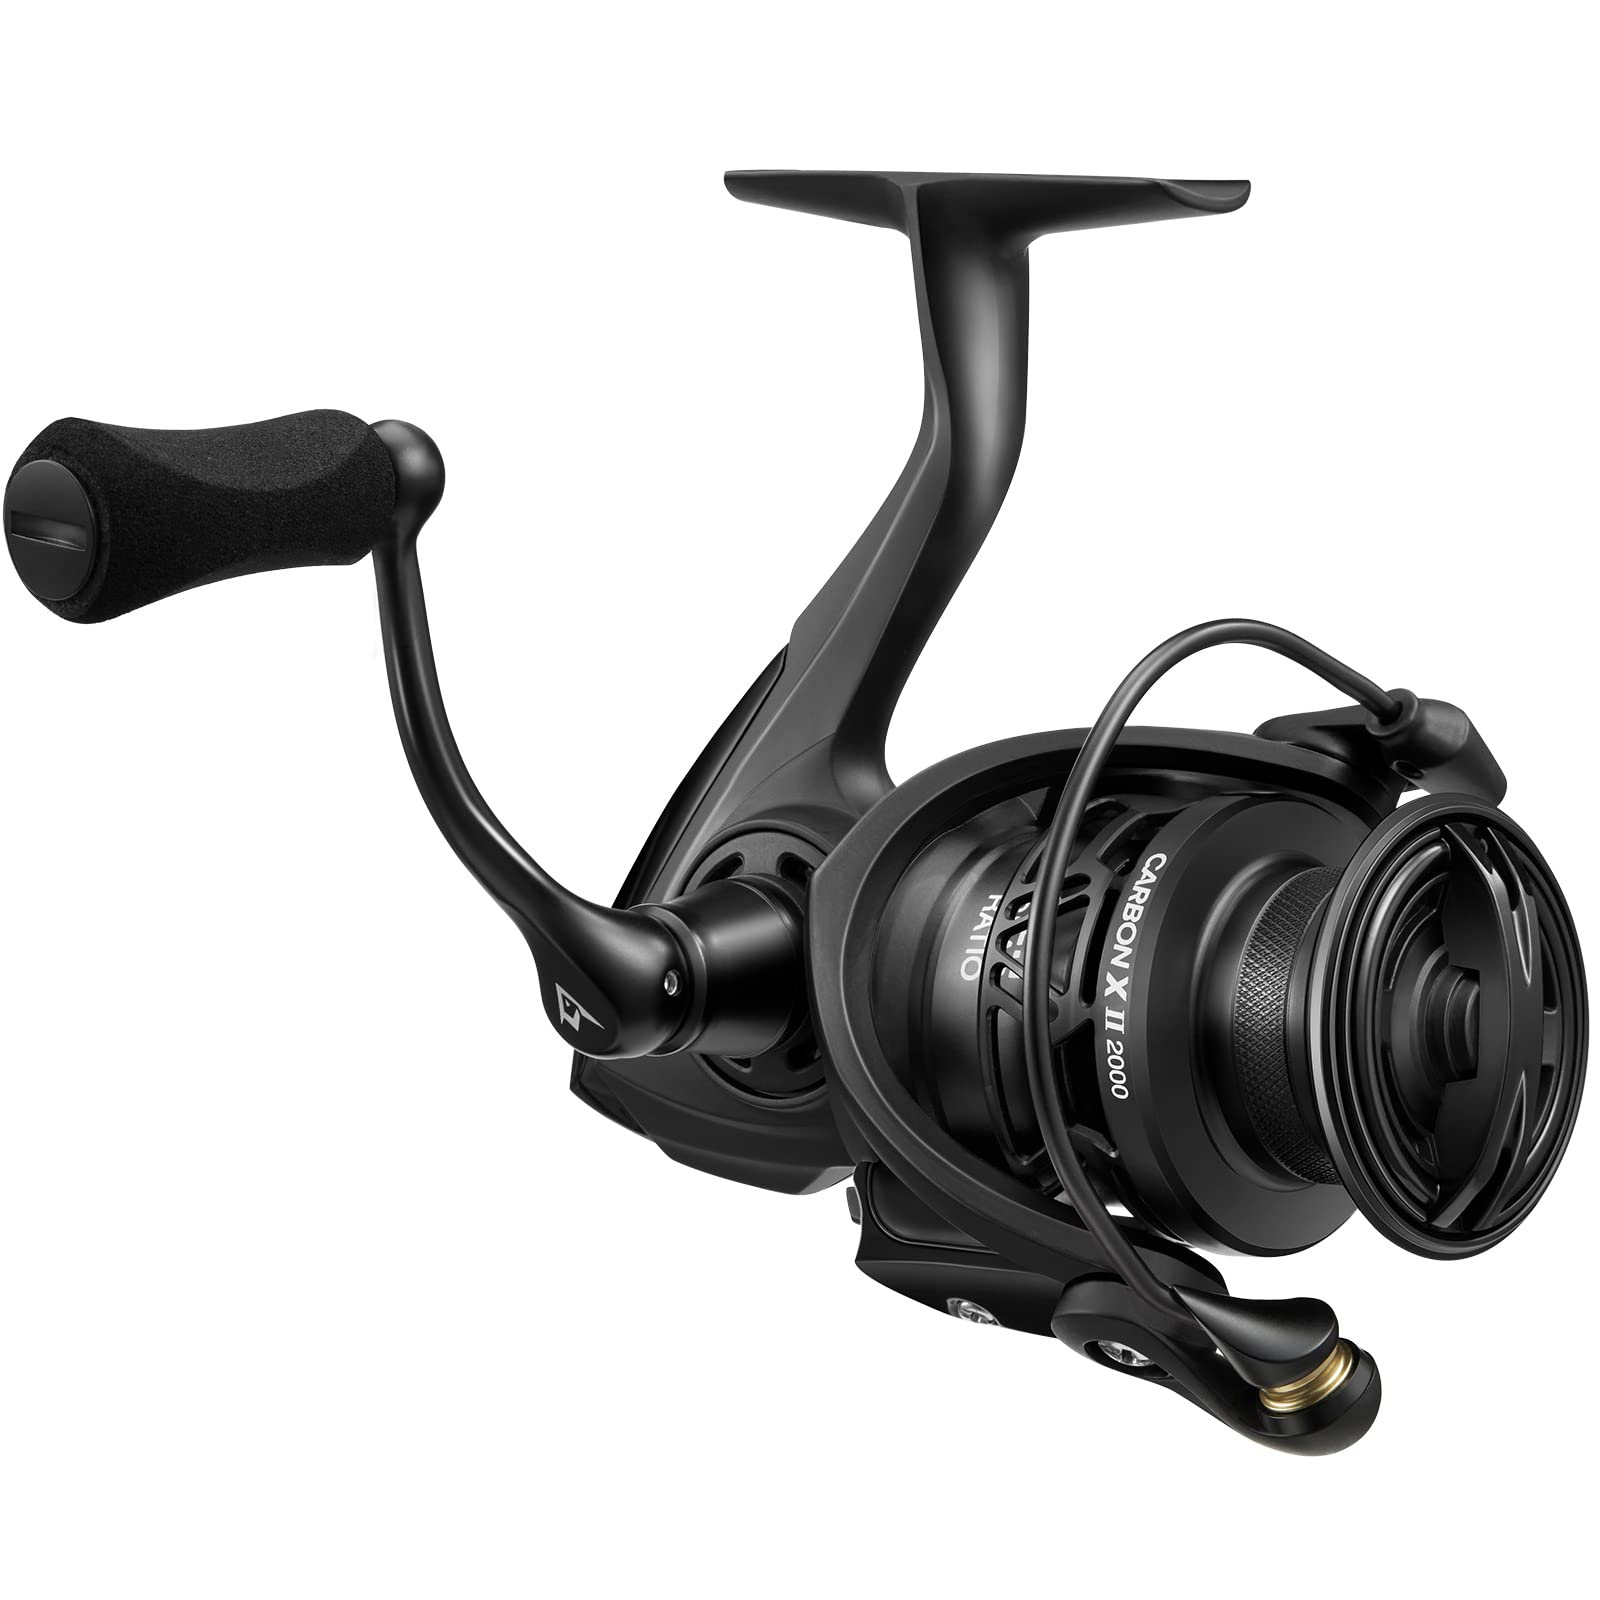 CS5 Spinning Reel， Ultralight Carbon Frame Fishing Reel with 8+1 Corrosion  Resistant Bearings Smooth Powerful Fishing Reel Spinning with 20Lb Carbon F